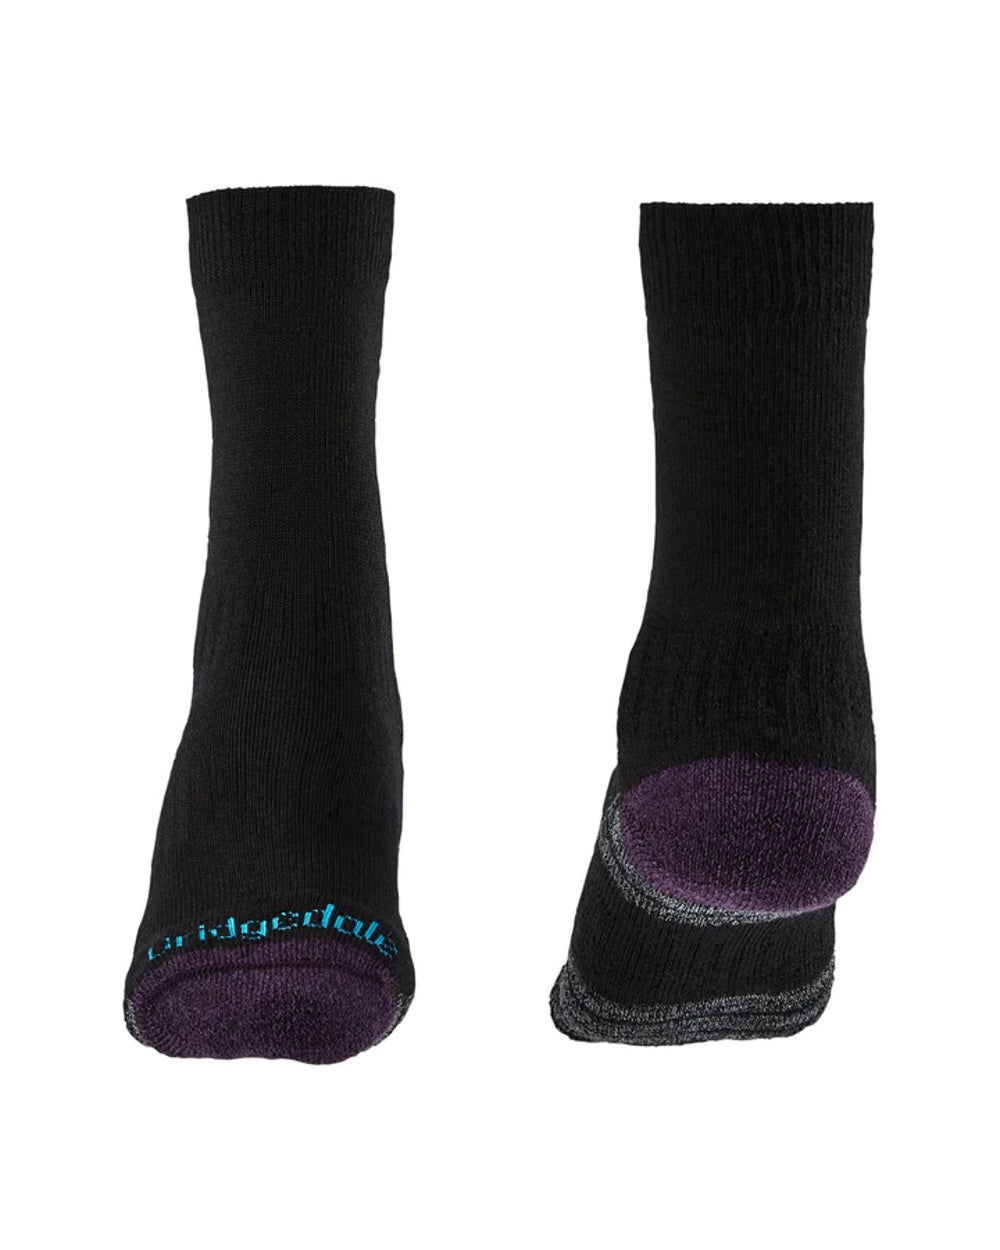 Front and back of Black/Purple coloured Bridgedale Womens Lightweight Merino Performance Socks on white background 